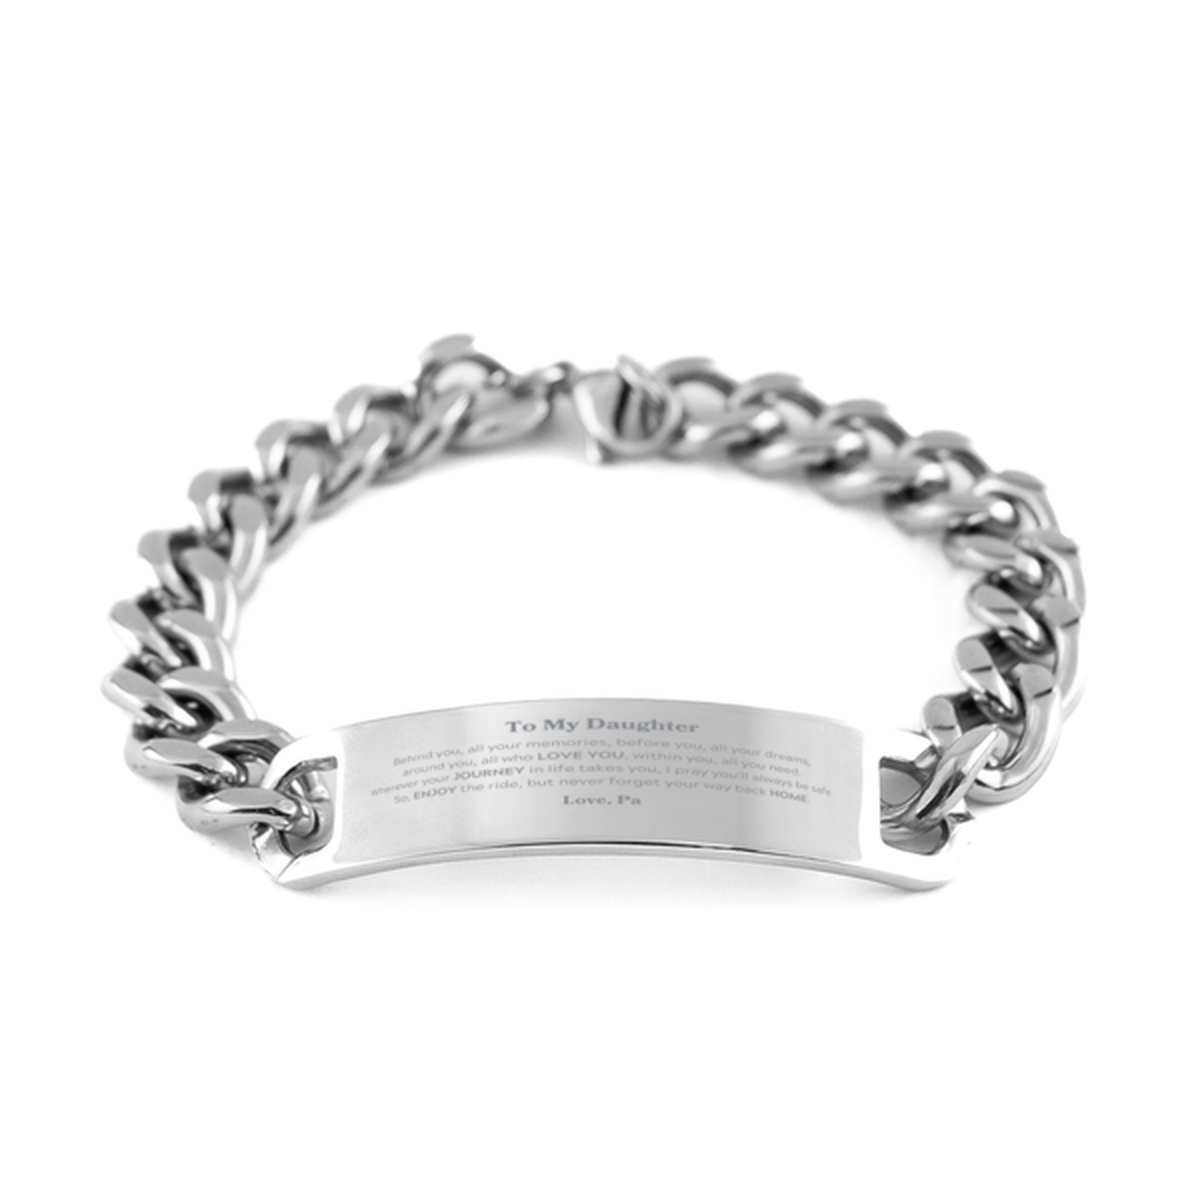 To My Daughter Graduation Gifts from Pa, Daughter Cuban Chain Stainless Steel Bracelet Christmas Birthday Gifts for Daughter Behind you, all your memories, before you, all your dreams. Love, Pa